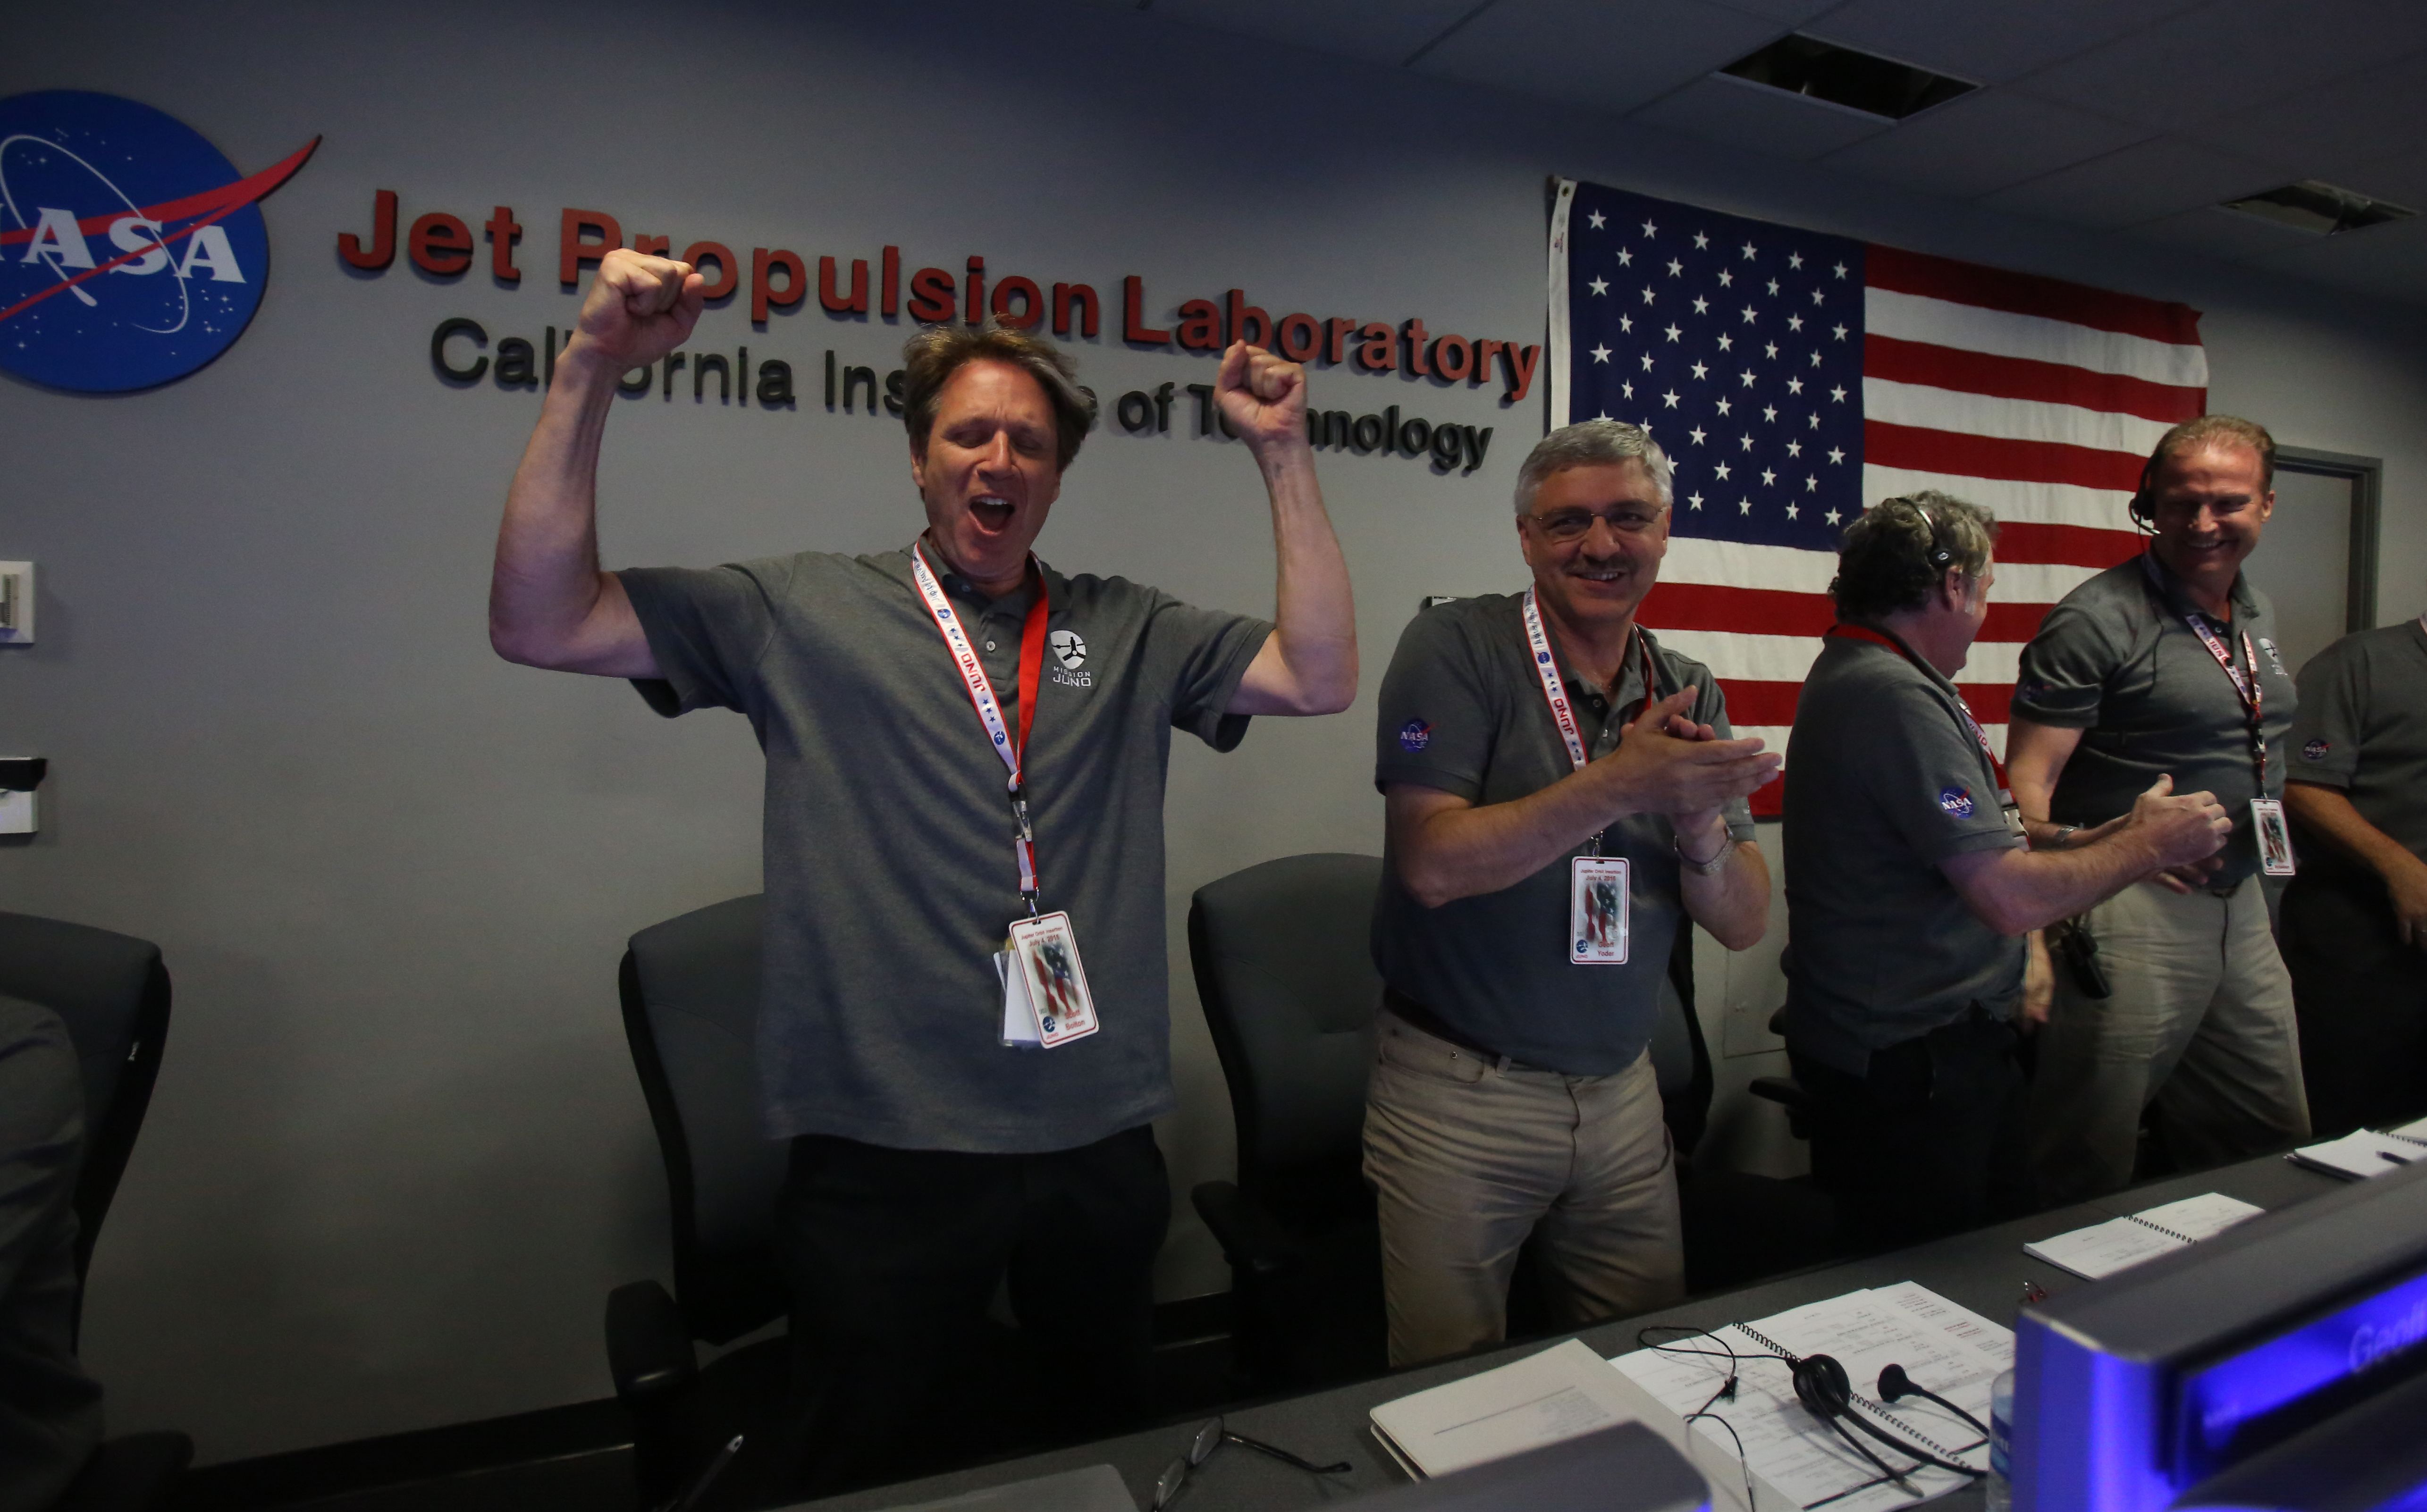 Scott Bolton (L), NASA principal investigator for the Juno mission to Jupiter, reacts as the Juno spacecraft successfully enters Jupiter's orbit on July 4, 2016, at the Jet Propulsion Laboratory in Pasadena, California. Juno was launched from Cape Canaveral in Florida on August 5, 2011 on a five-year voyage to its mission to study the planet's formation, evolution and structure. / AFP PHOTO / POOL / Ringo Chiu